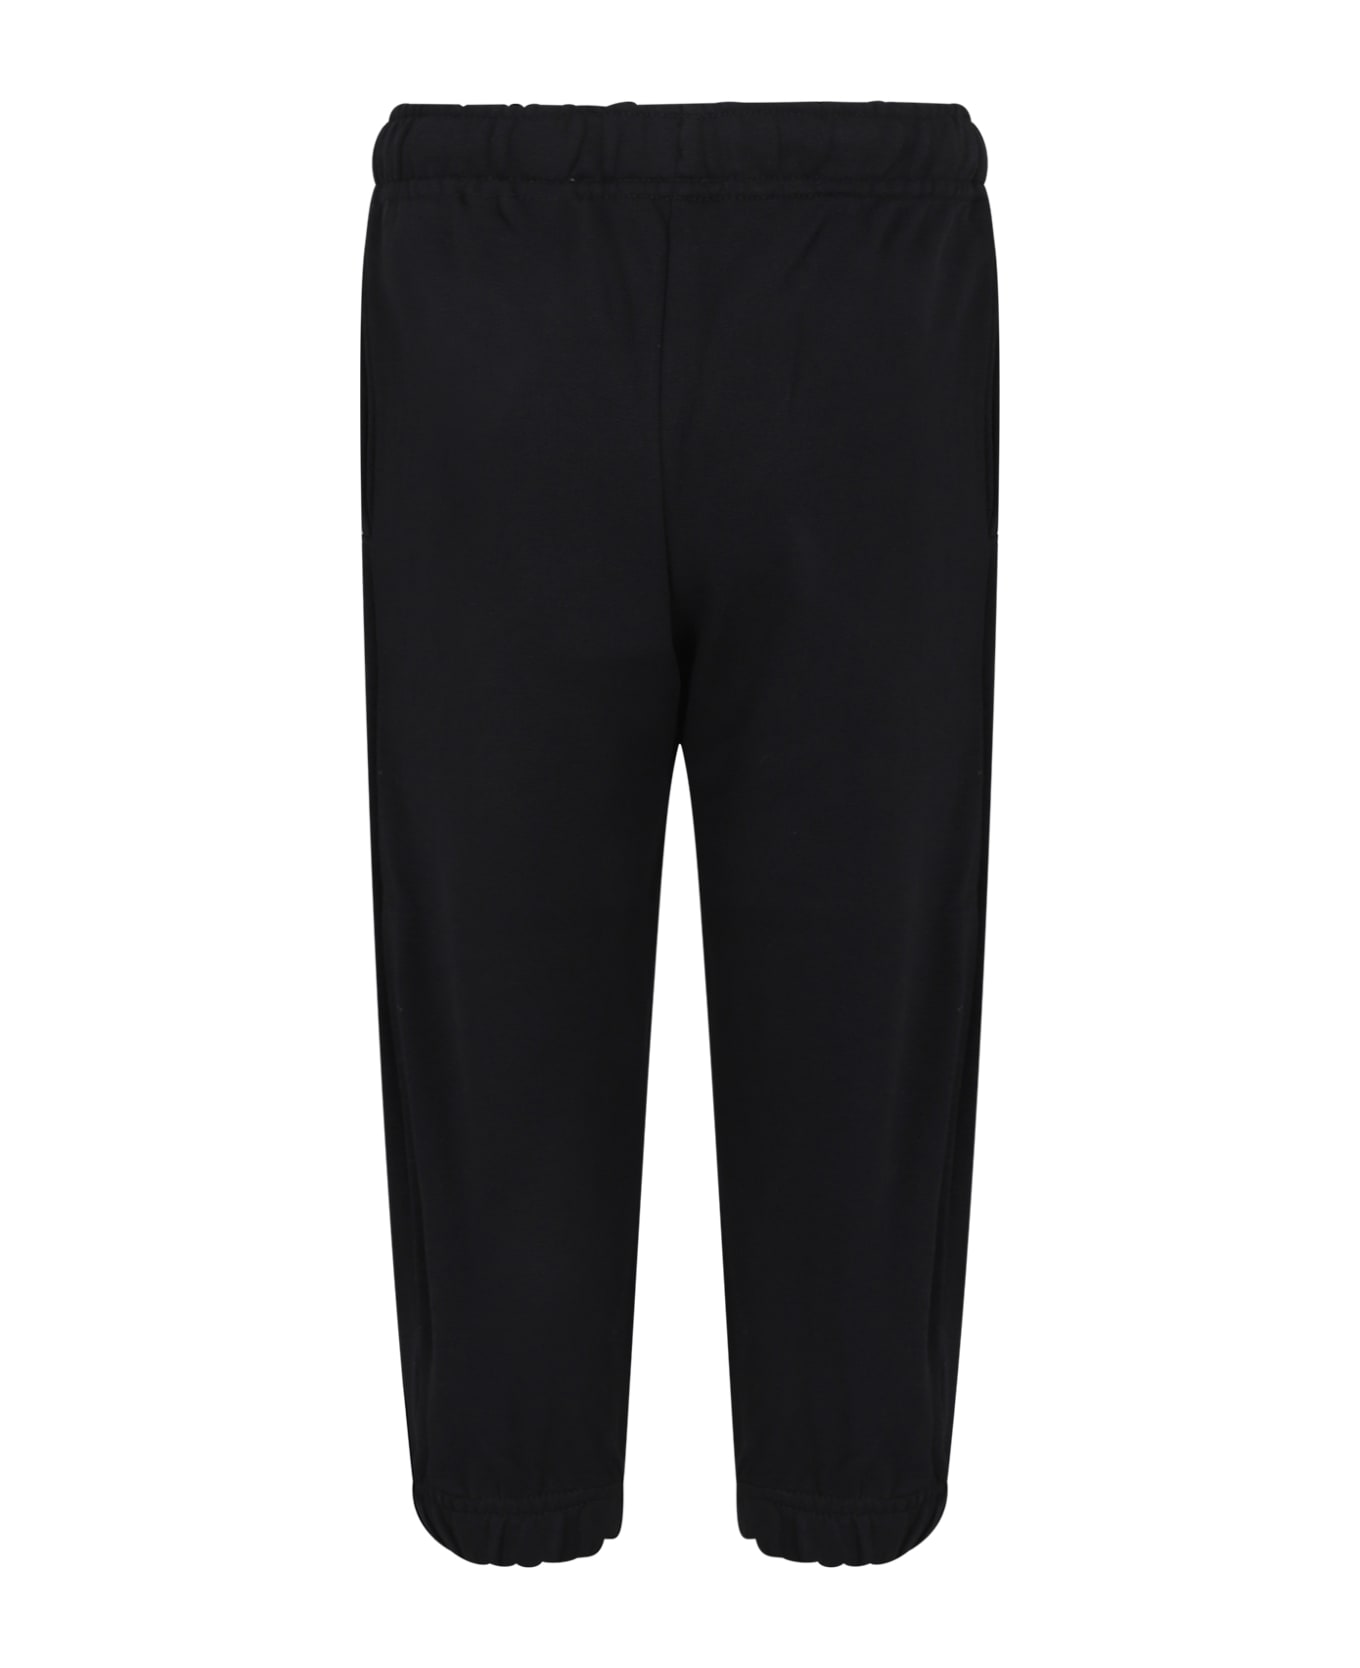 Molo Black Trousers For Boy With Writing - Black